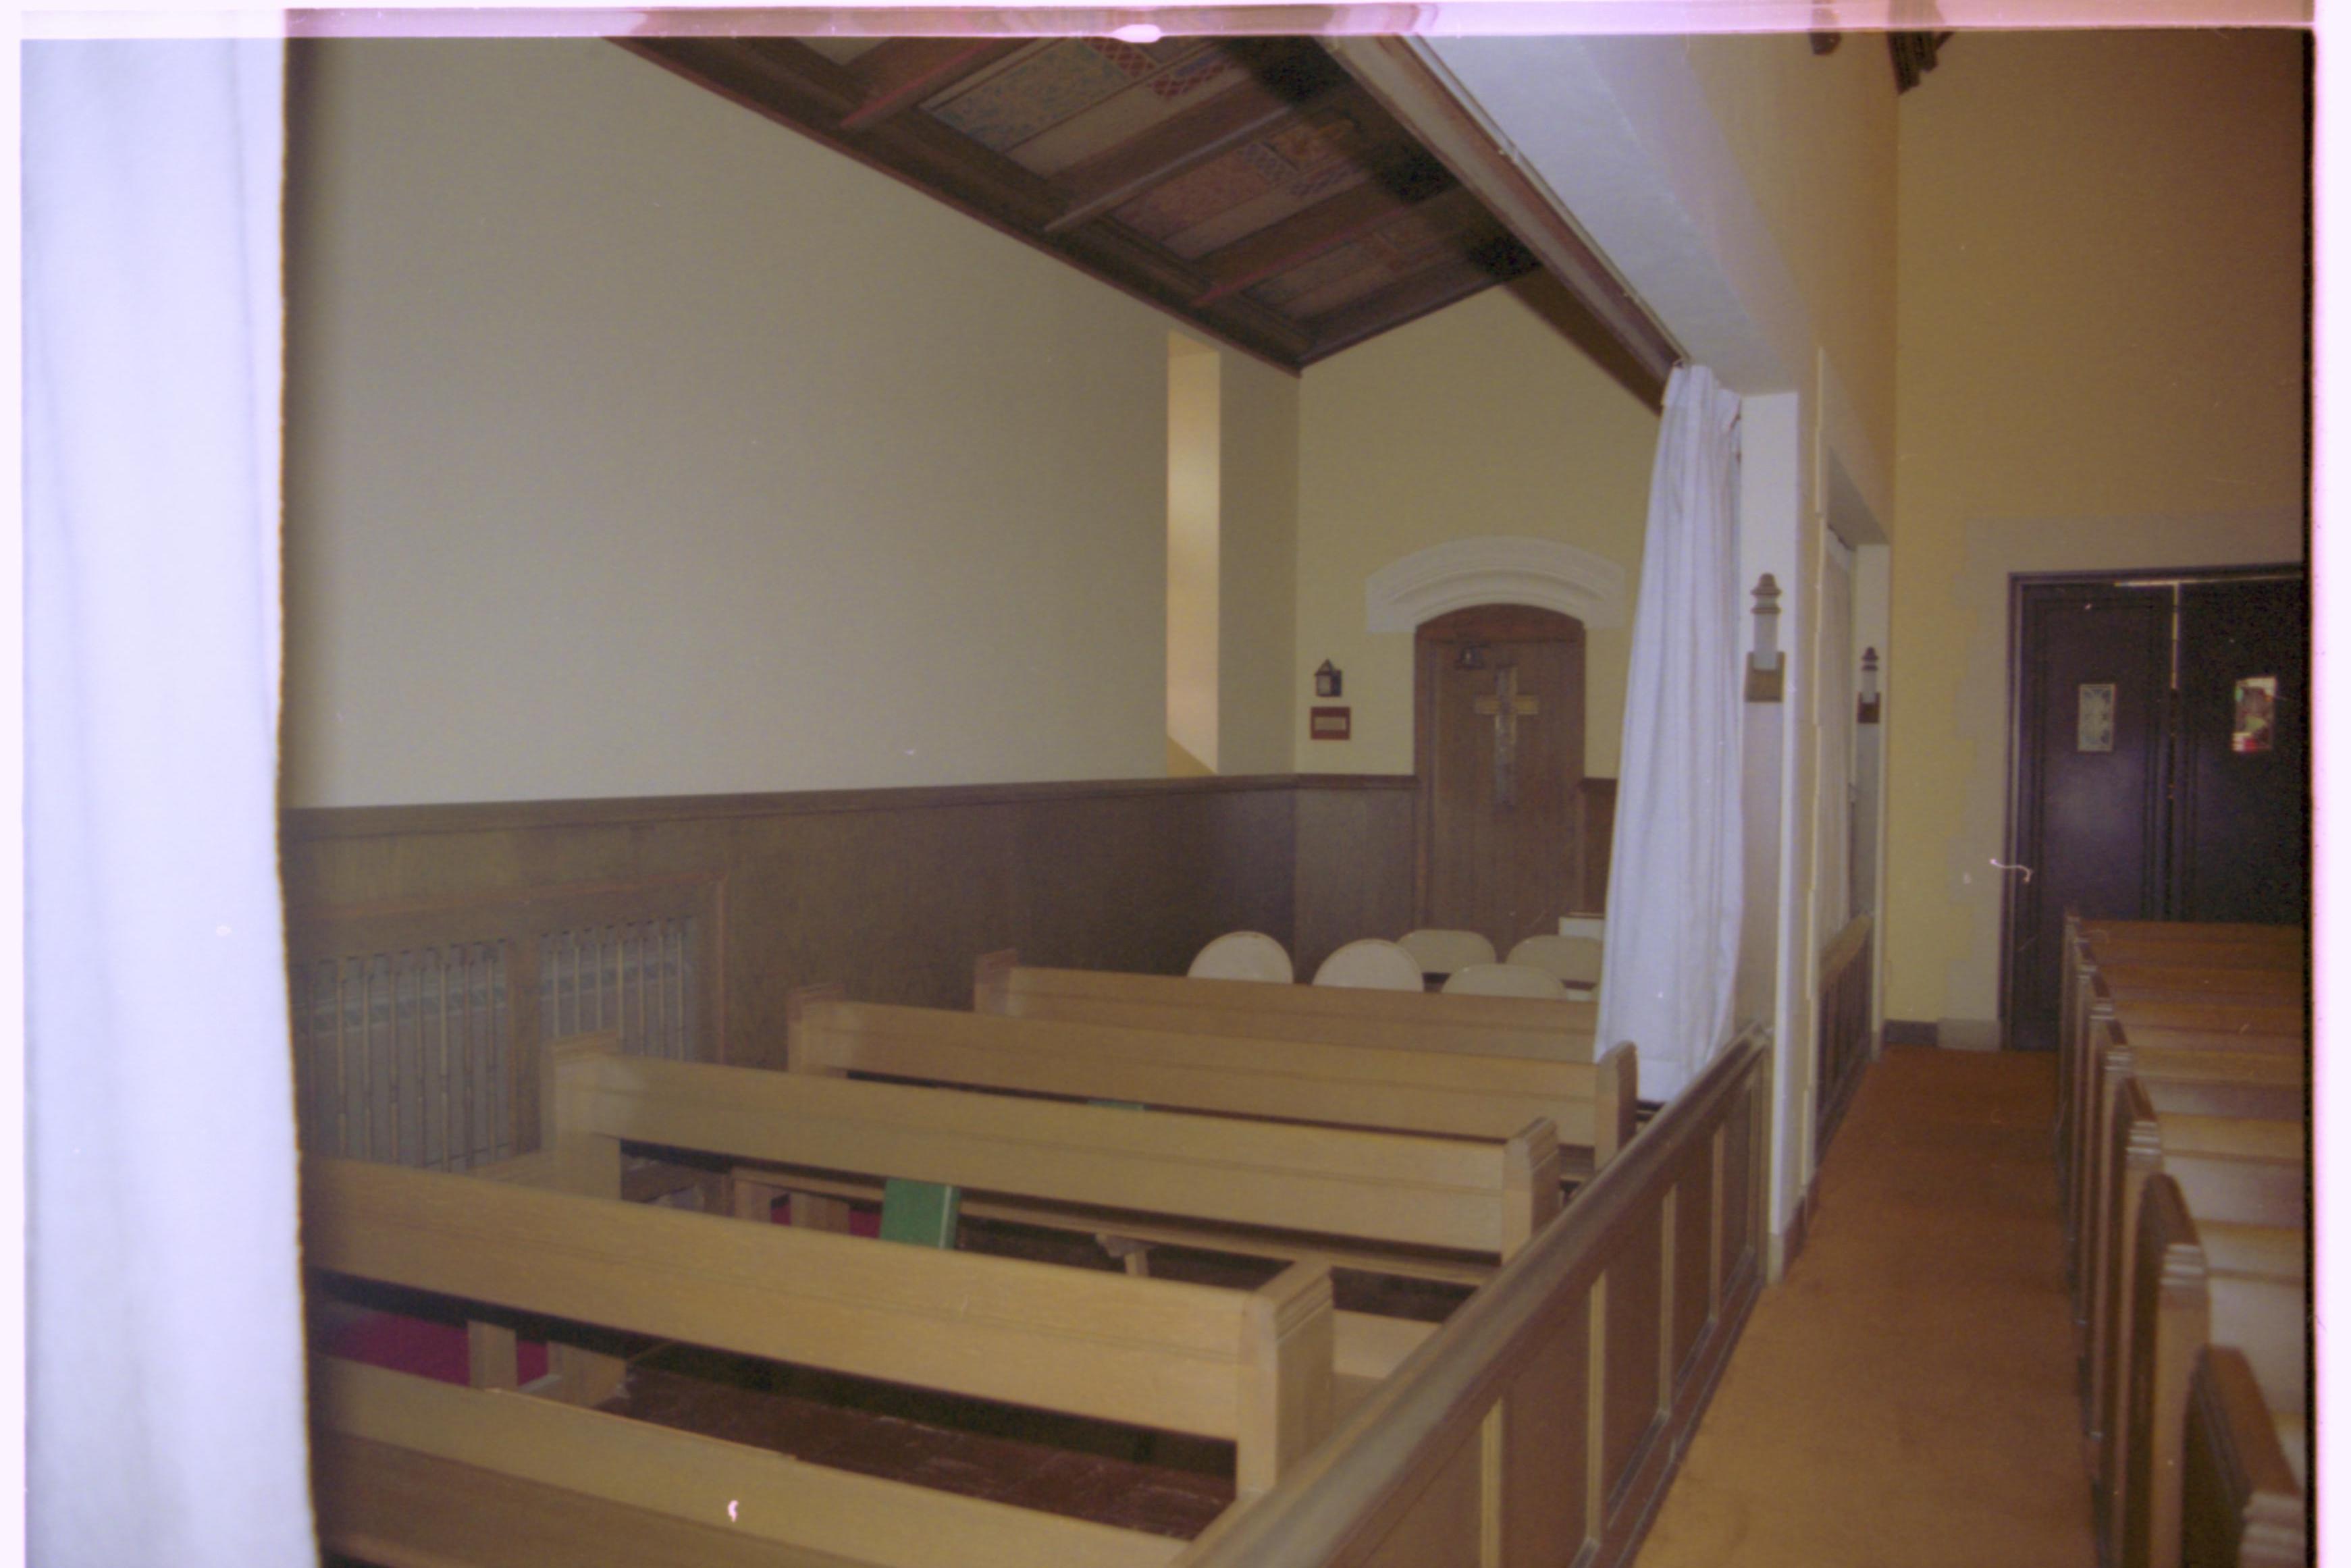 Pews, chairs in small worship area. Grace Lutheran Church